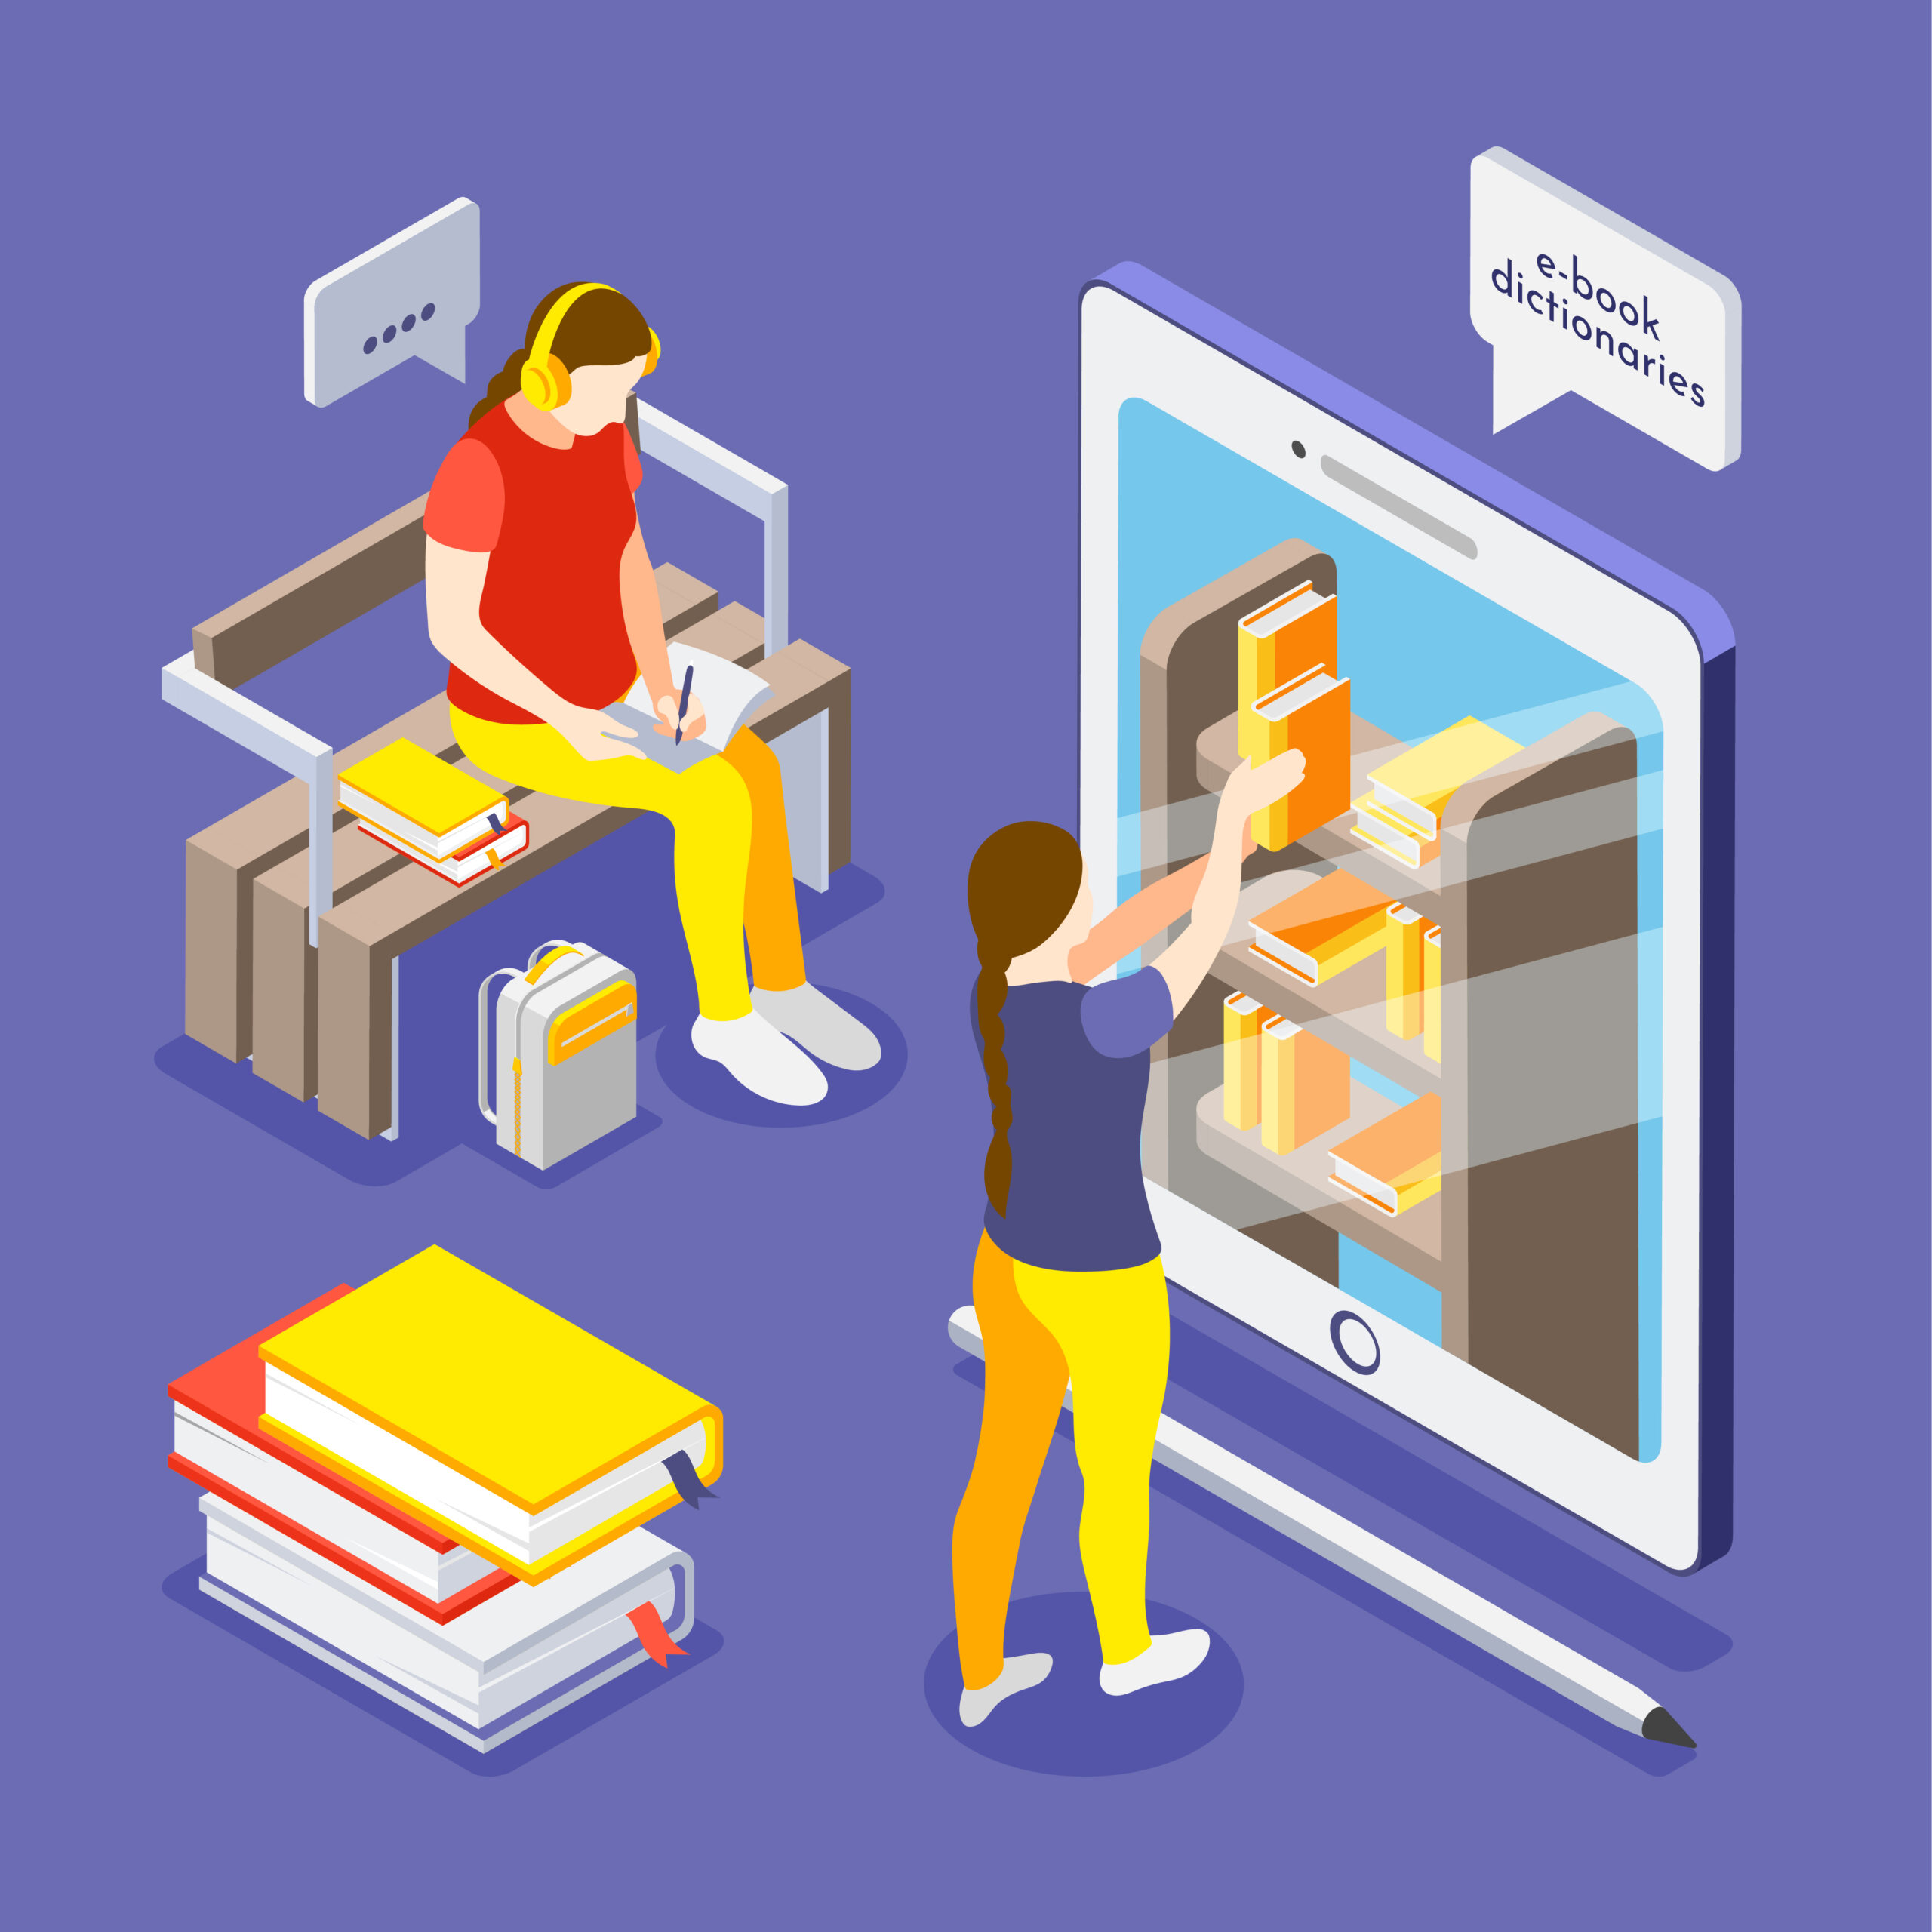 A graphic depicting two people surrounded by a couple of books and a big iPad screen, through which one person is grabbing a book.